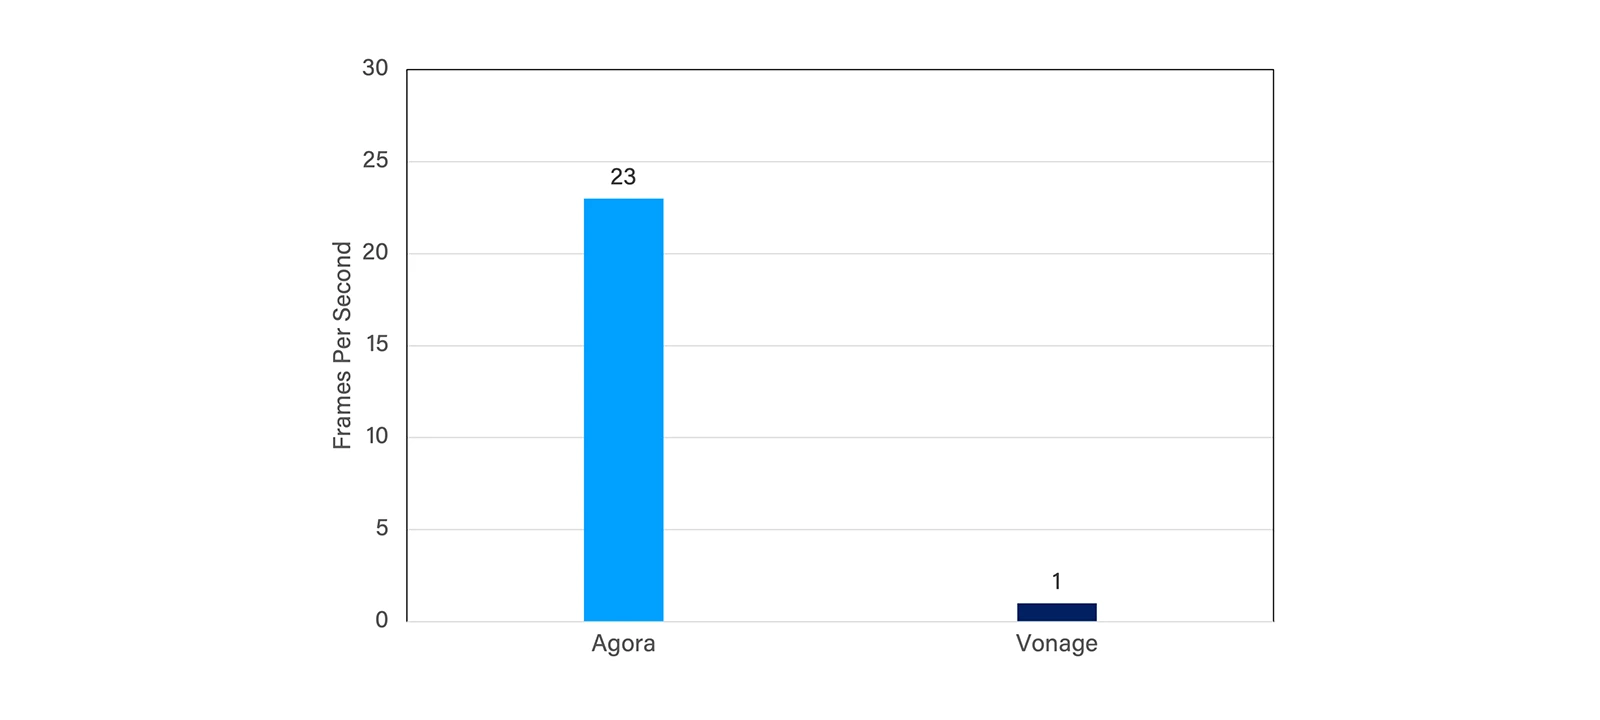 Figure 3: FPS comparison for Agora and Vonage with network having downlink packet loss of 25%.